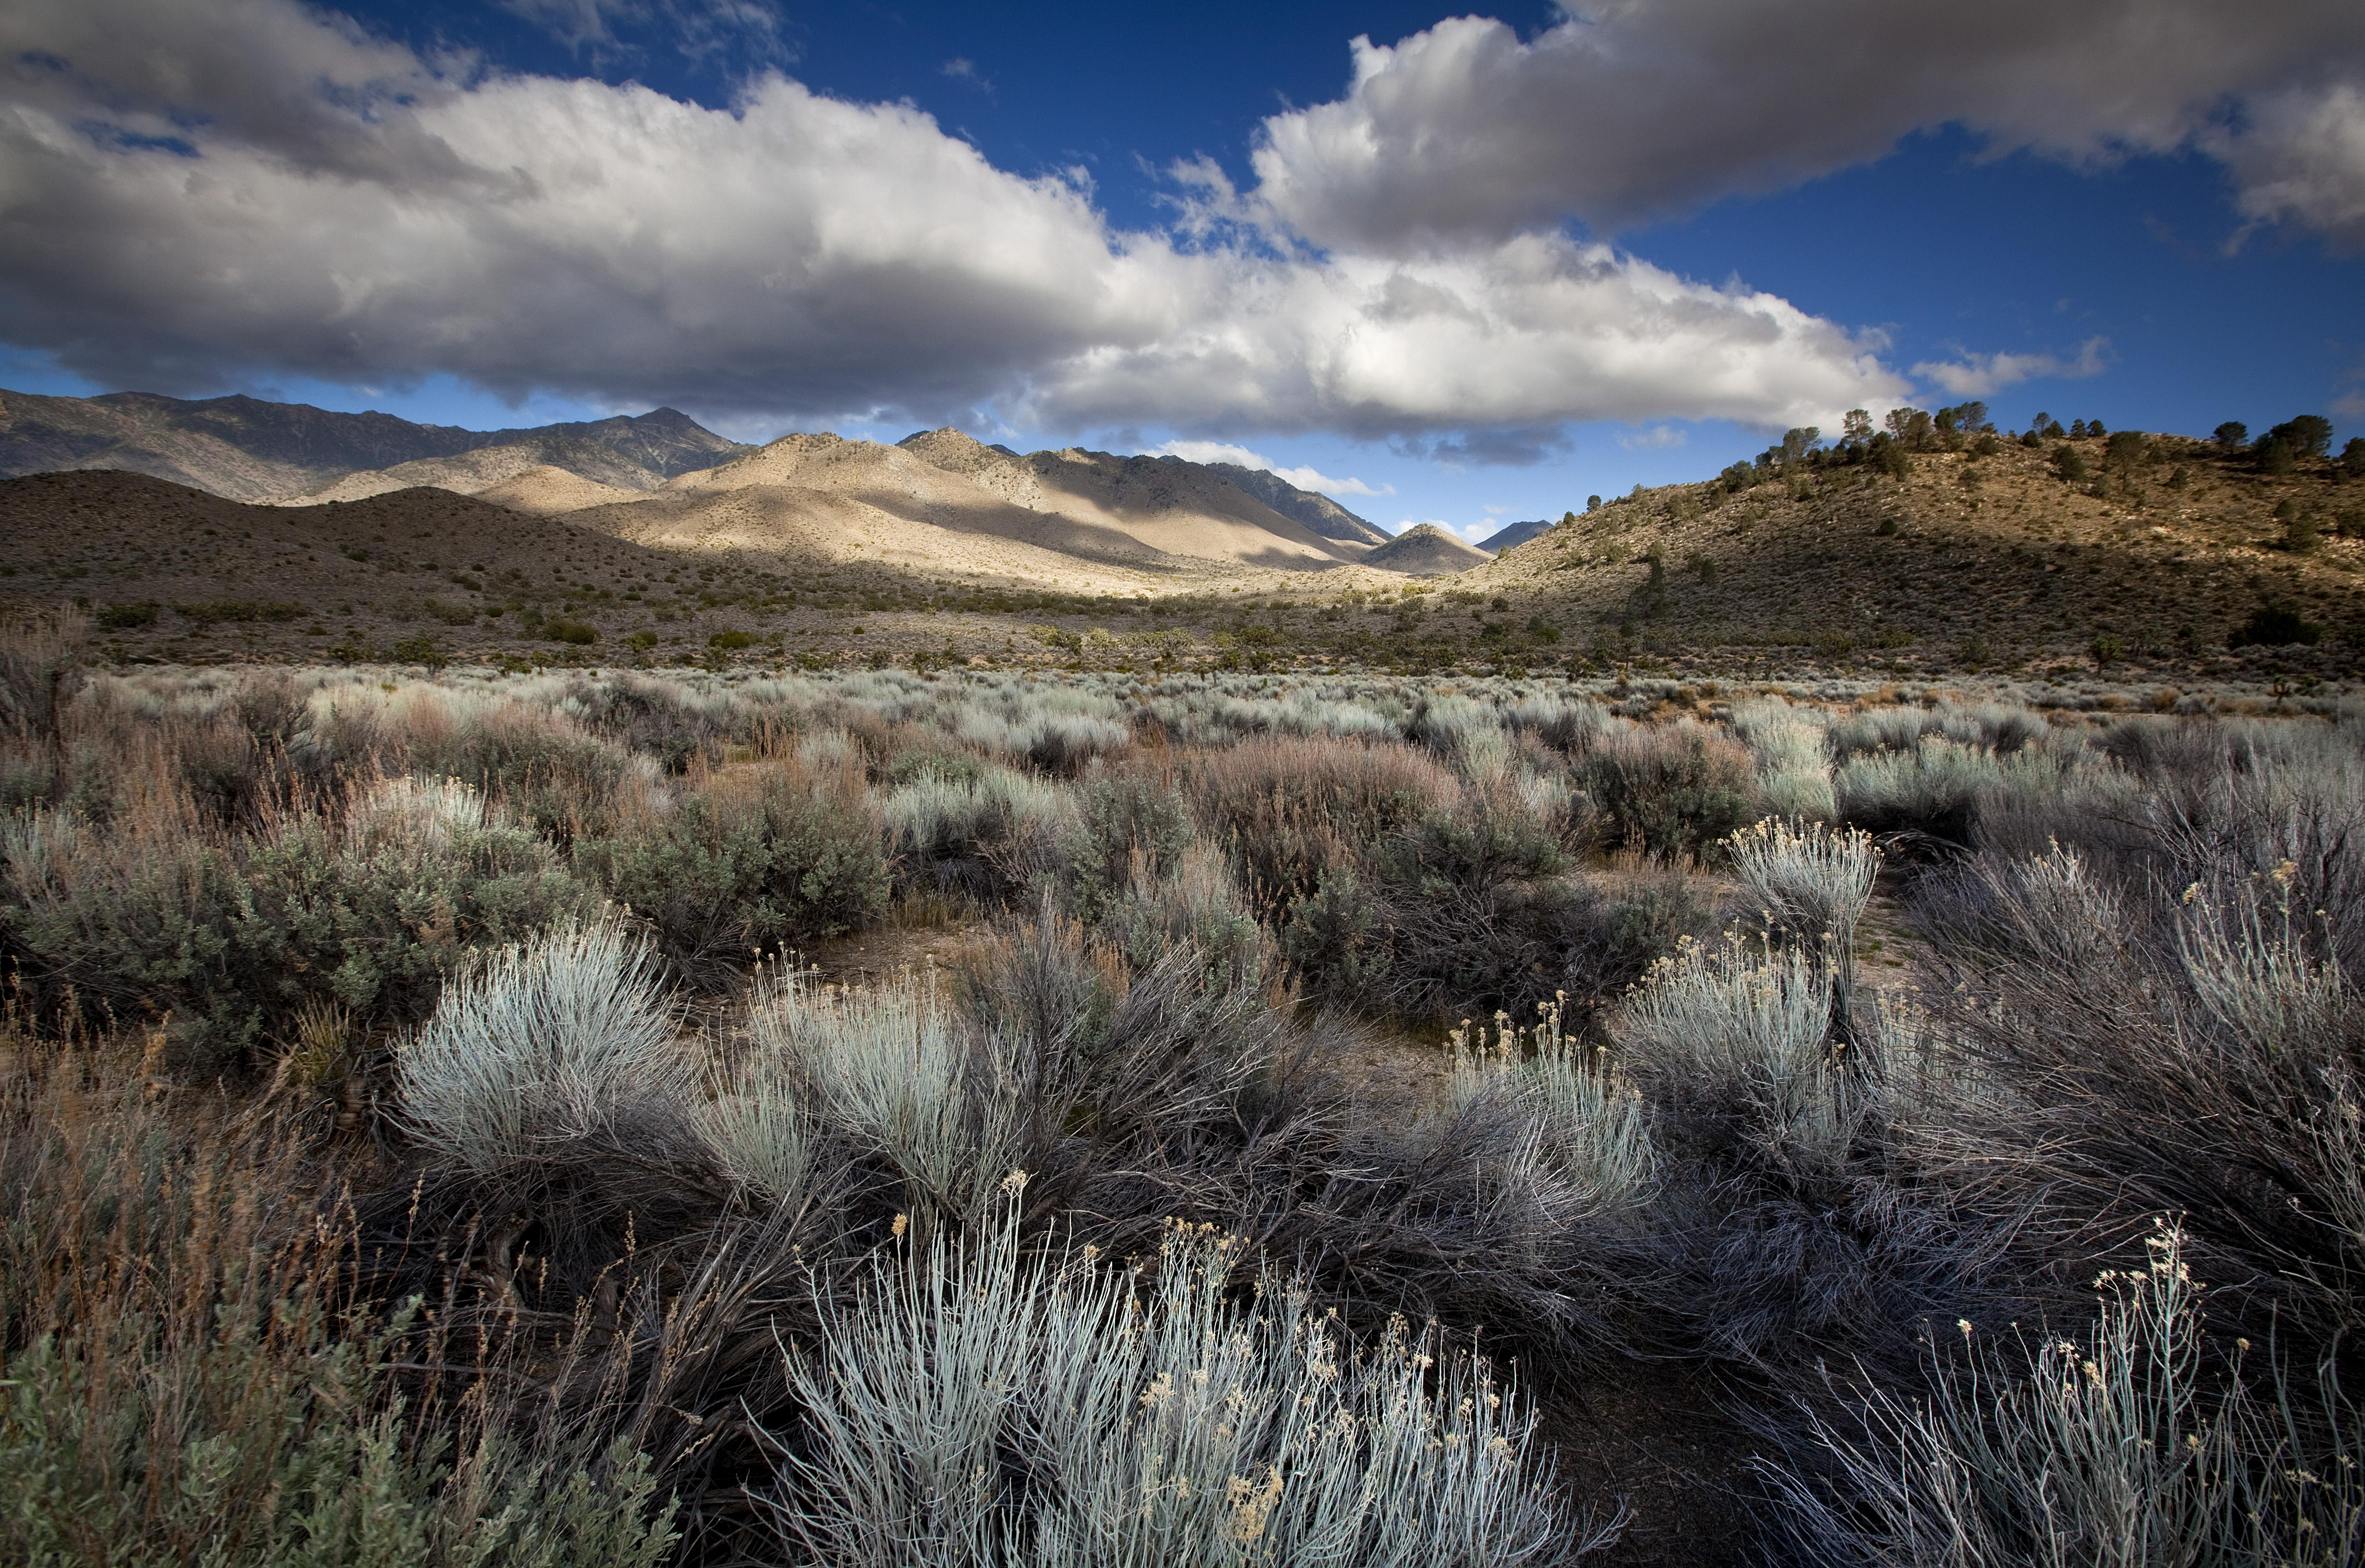 Landscape picture of sagebrush, clouds and brown hills in the background